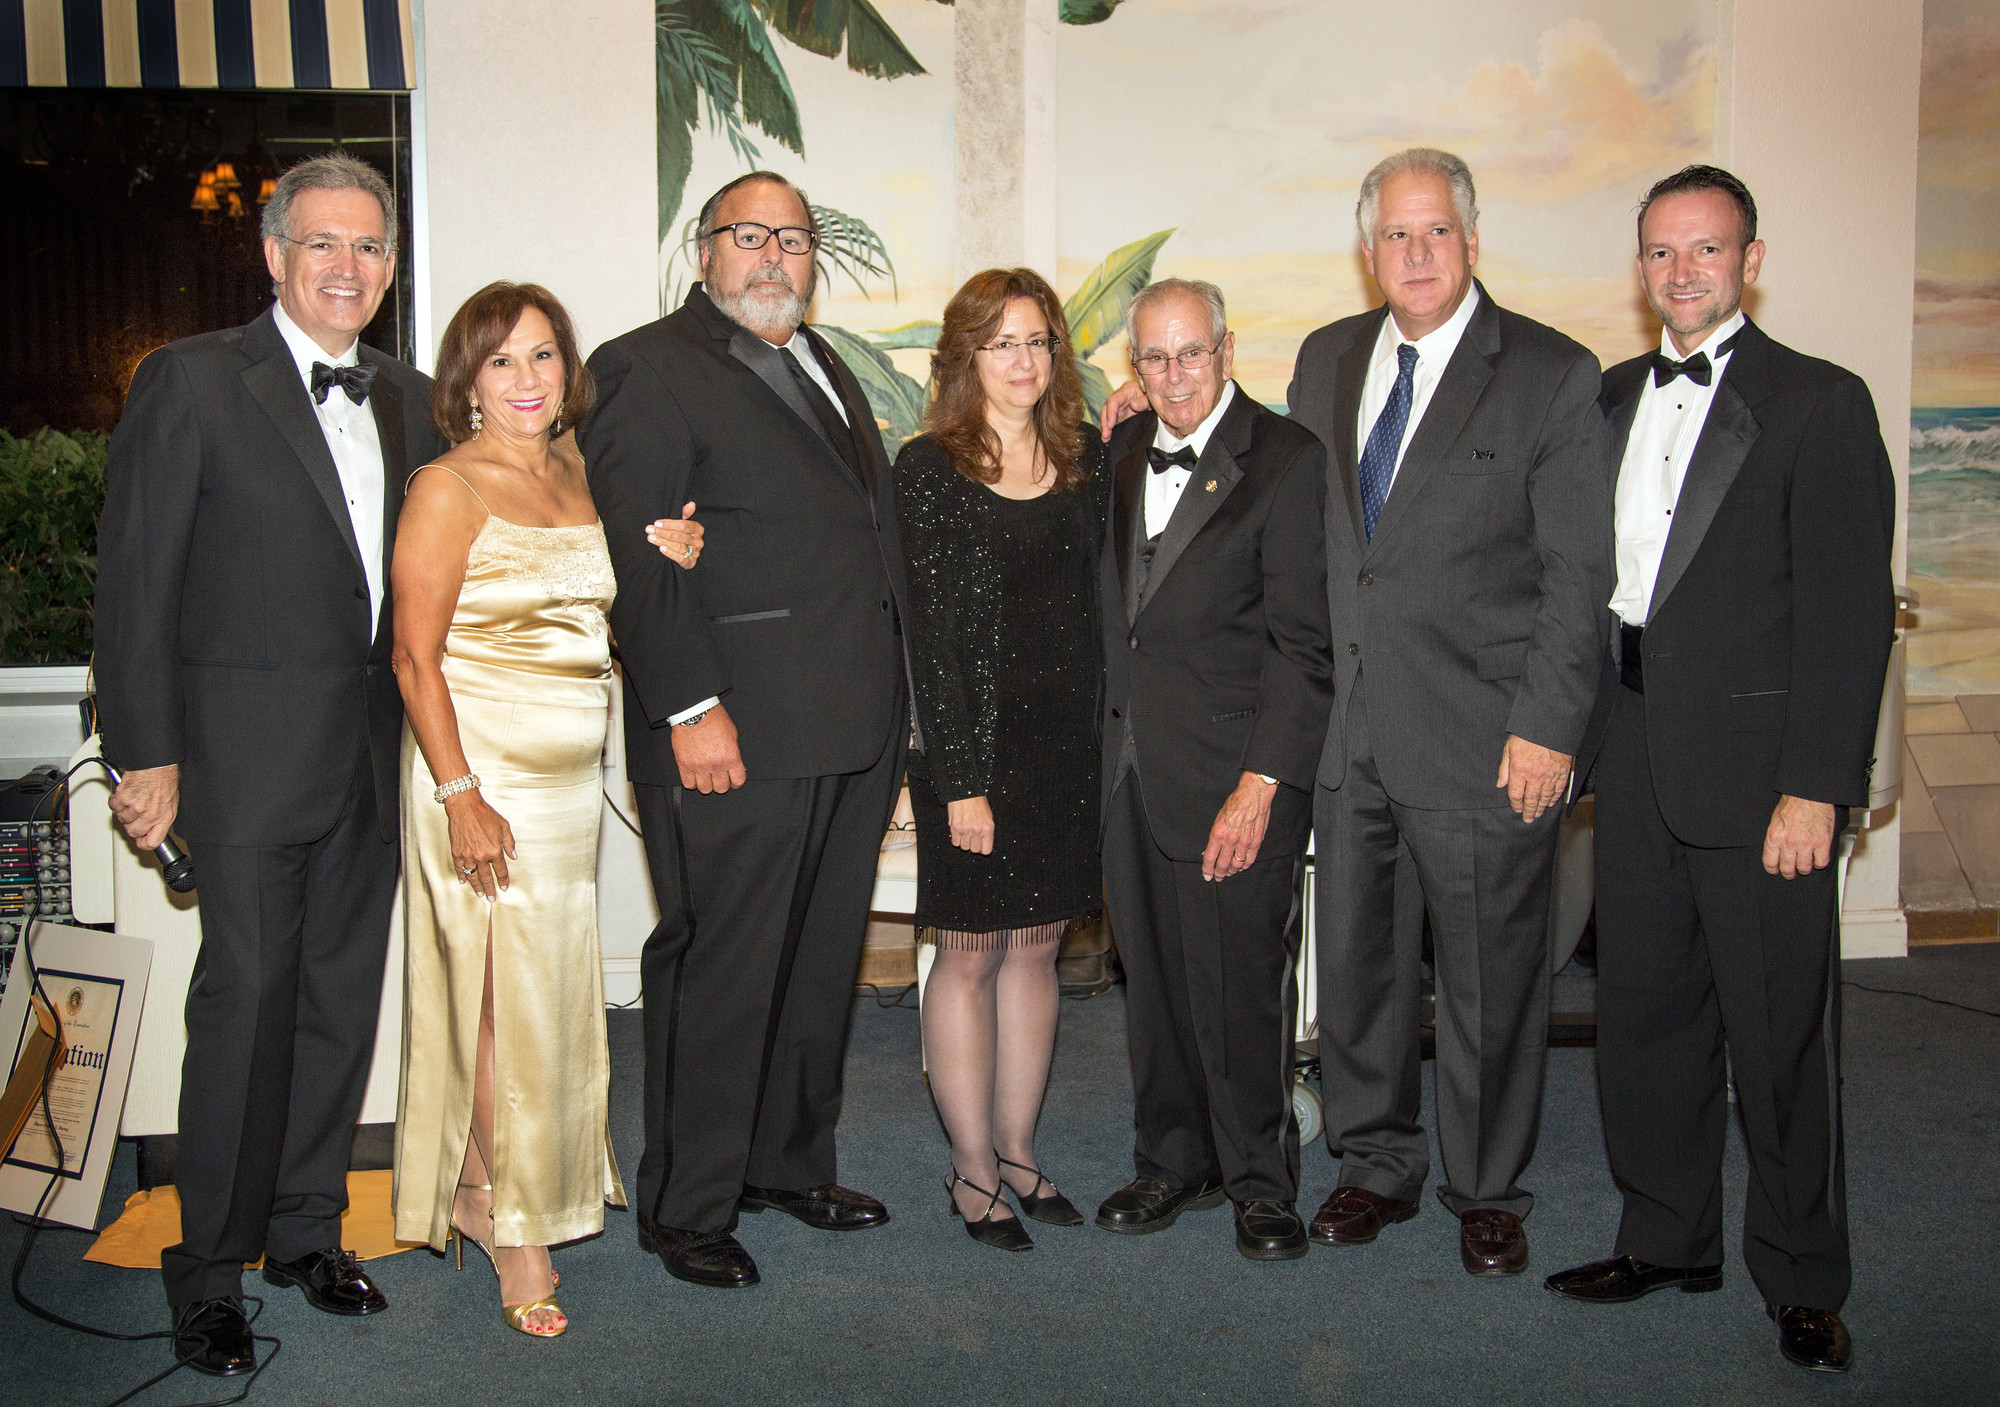 Co-chairman and President of the Guild Wayne Lipton, left, event Co-chair Joan MacNaughton, Honoree Mayor Francis X. Murray, the Mayor’s secretary Mary Rohrs, Honoree Eugene Murray, former village administrator Tony Cancellieri and former Guild honoree Michael Bower all enjoyed the evening.